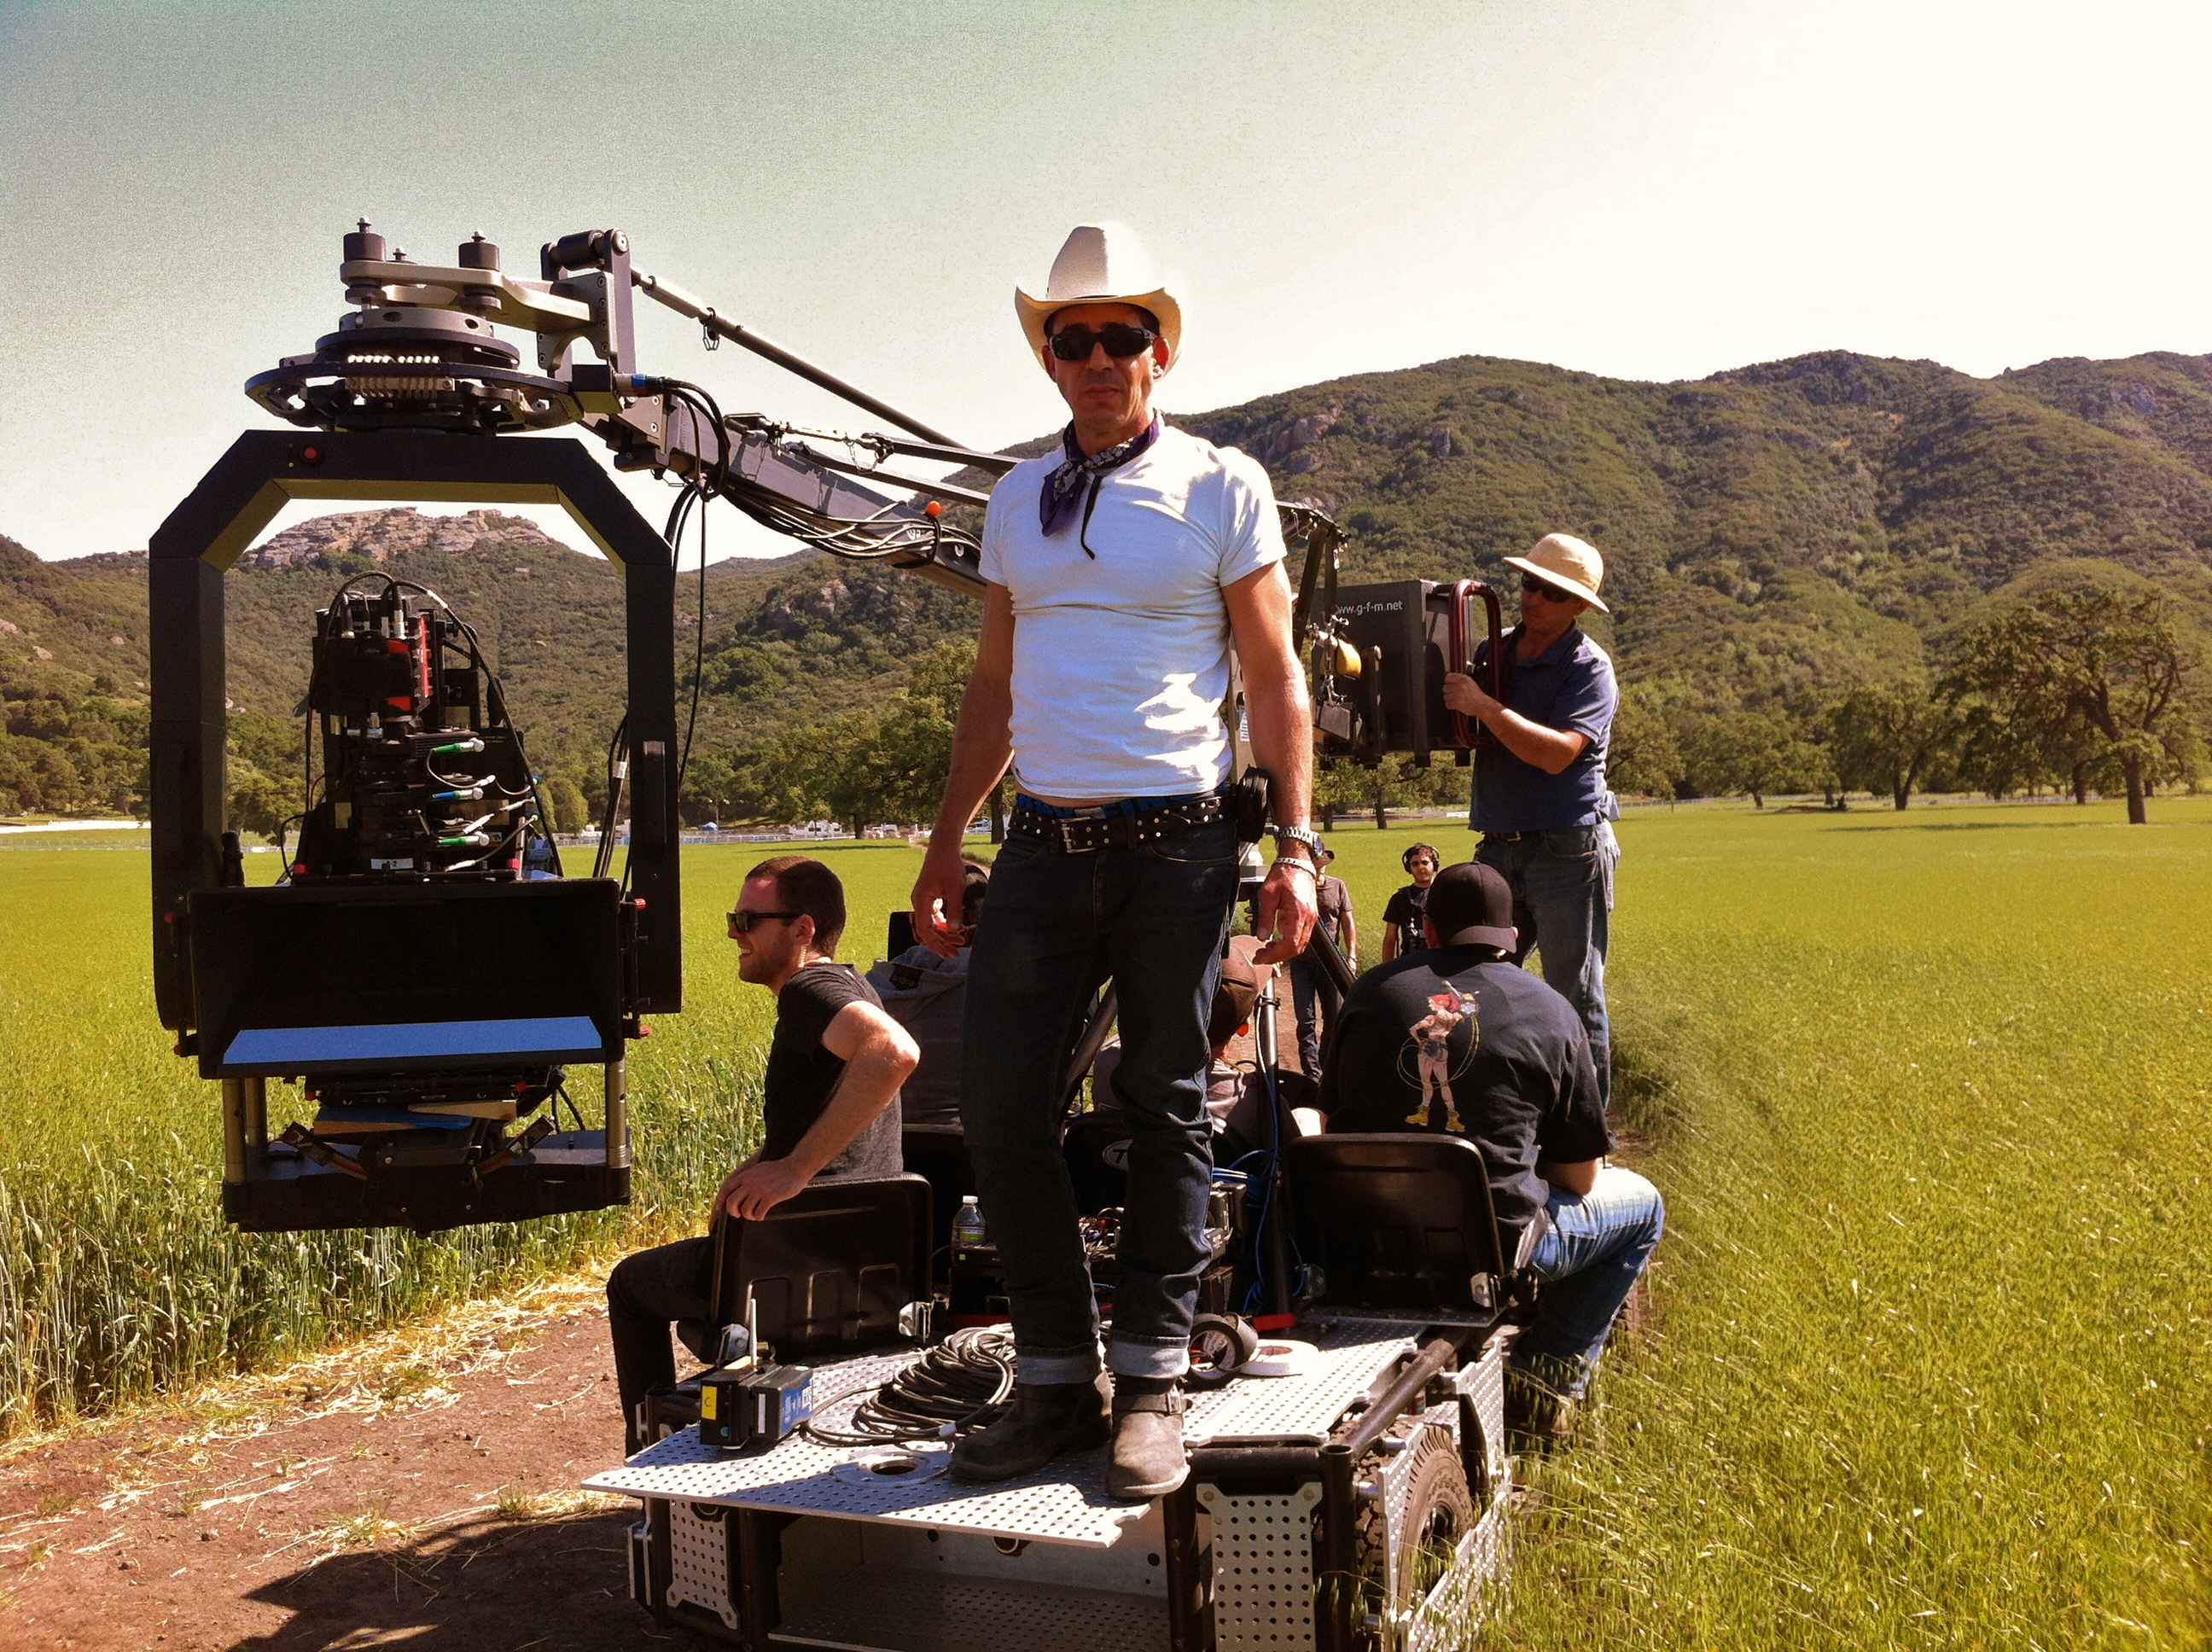 Monty Miranda on location with American Mustang.